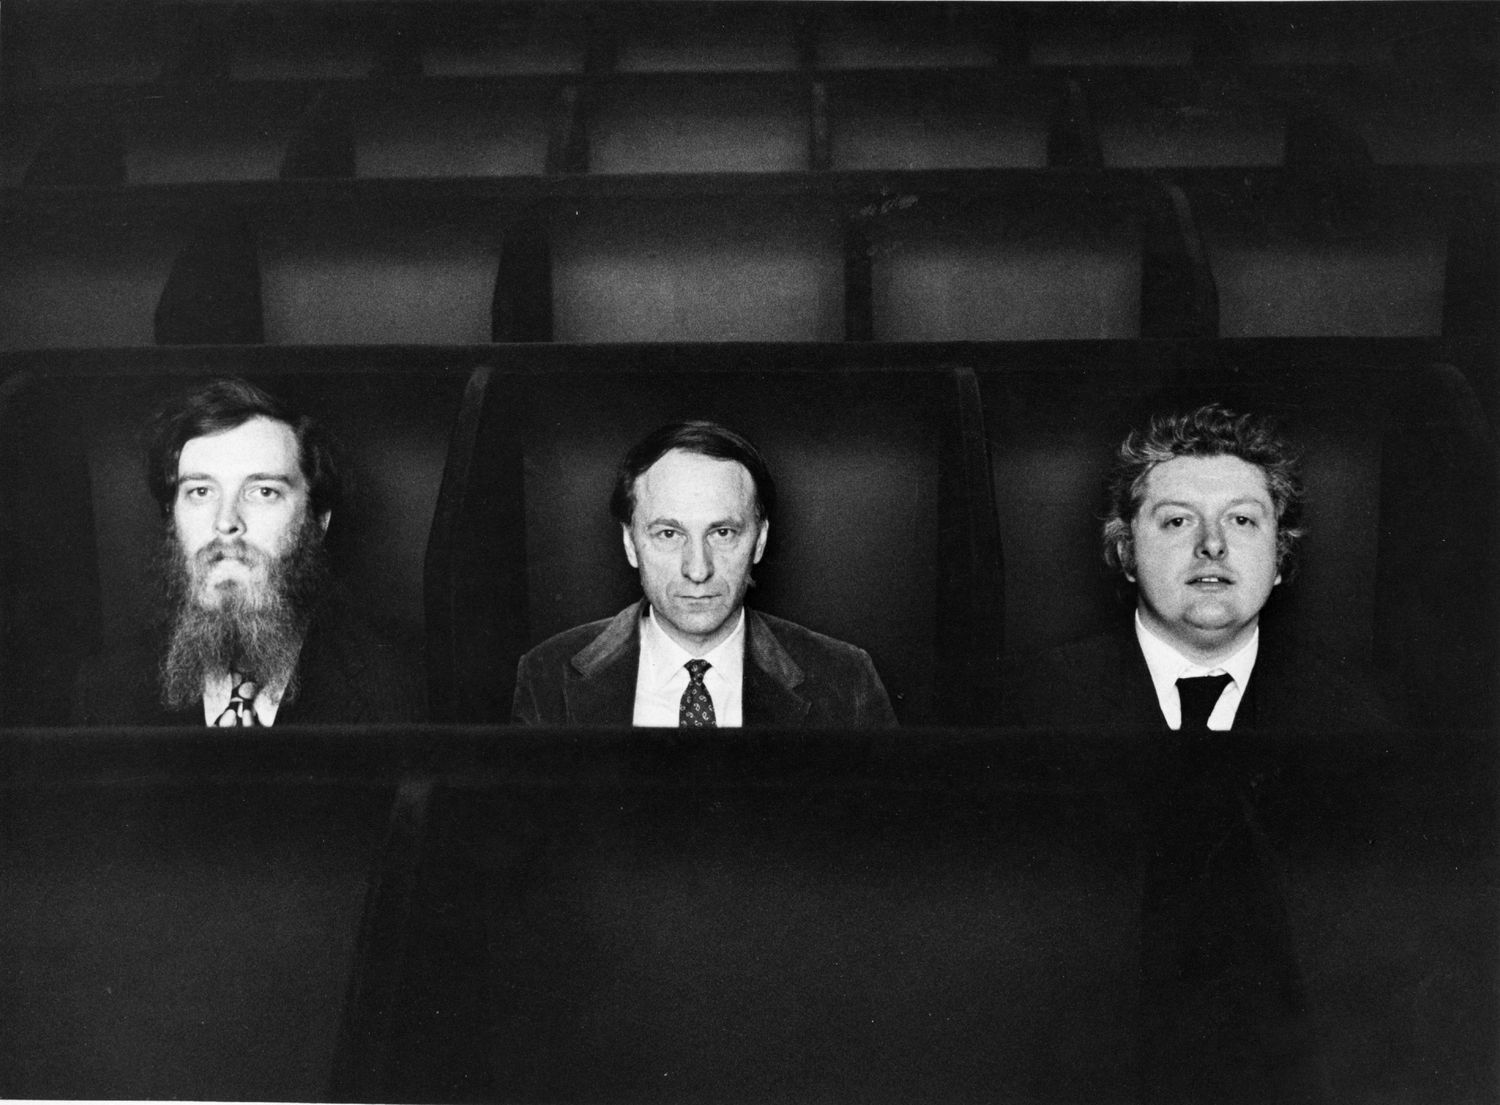 Left to right: P. Adams Sitney, Jonas Mekas and Peter Kubelka at the Invisible Cinema, Anthology Film Archives, 1970. Courtesy of Anthology Film Archives